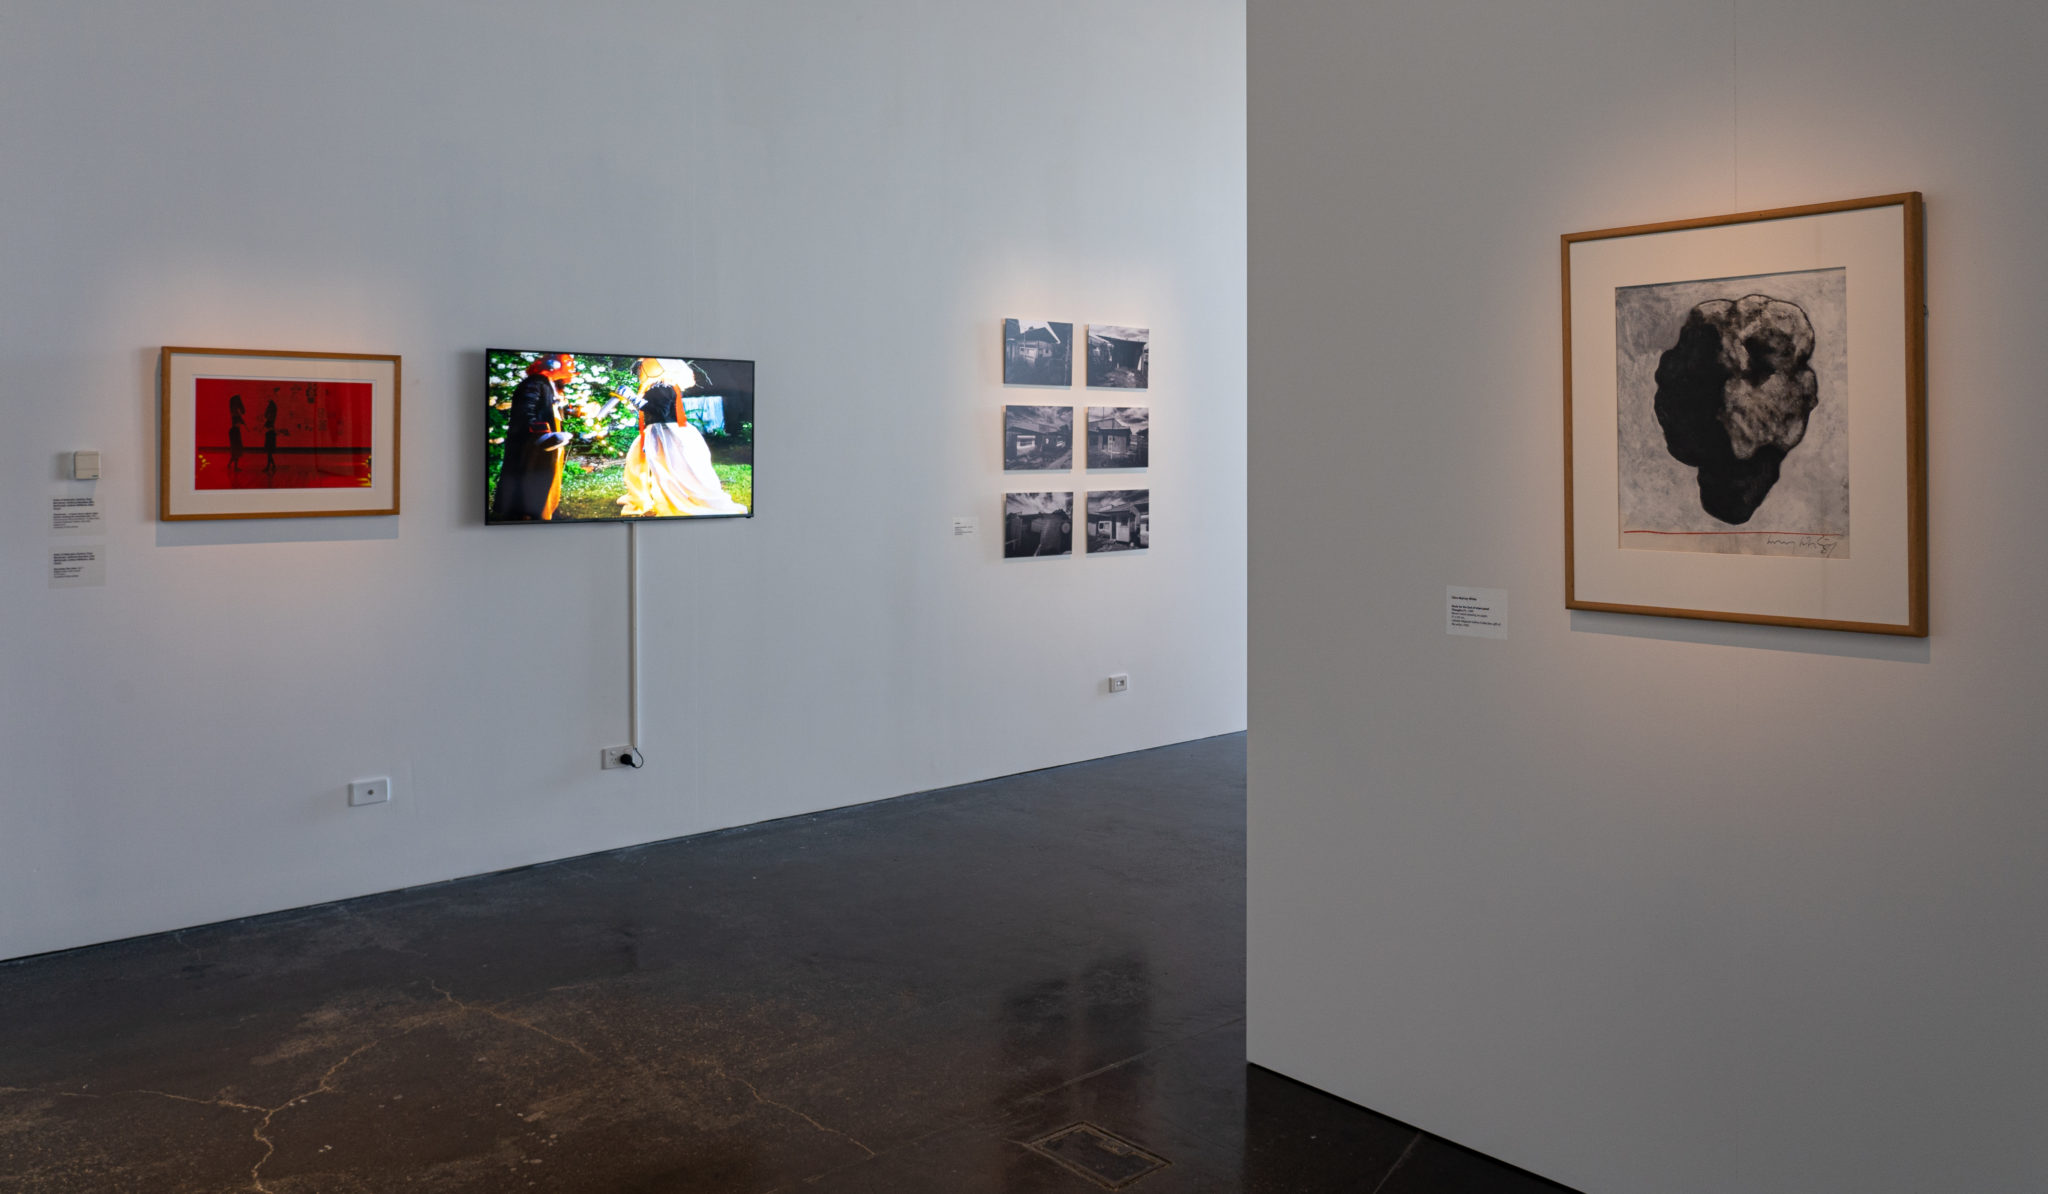 Exhibition documentation of 50 Years, 50 Artists, at Latrobe Regional Gallery, 2021. Pictured: (left, back wall) Owls of Nebraska, Checkmate – a future dance about robot horses working the assembly line, 2021, Performance documentation, 16 May 2021, Latrobe Regional Gallery, Morwell, Inkjet print, Courtesy of the artists. Owls of Nebraska, November Star Gate, 2017, Digital video with sound, 3.19 mins, Courtesy of the artists. (right, back wall) Pezaloom, Lifeboats on land (Nos. 1 – 6), 2014, C Type print, 30 x 42 cm each, Latrobe Regional Gallery Collection, purchased 2019. (front wall) Clive Murray-White, Study for the God of Interrupted Thoughts #1, 1989, Mixed media drawing on paper, 51 x 43 cm, Latrobe Regional Gallery Collection, gift of the artist, 1992.